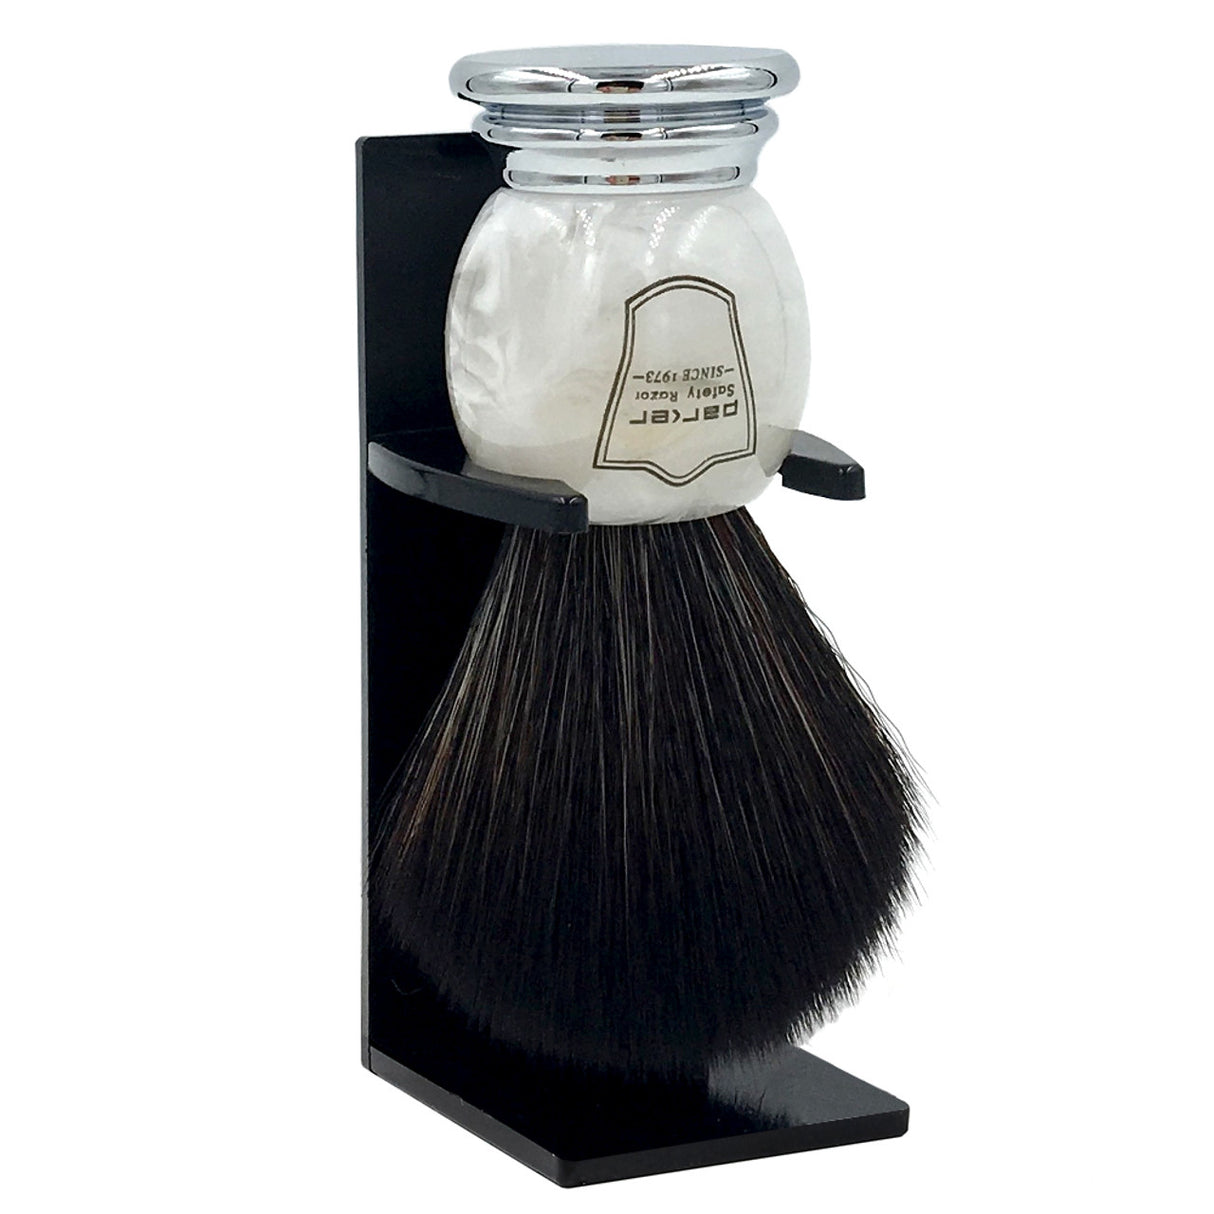 Parker - Marbled Ivory Handle Synthetic Shaving Brush and Stand